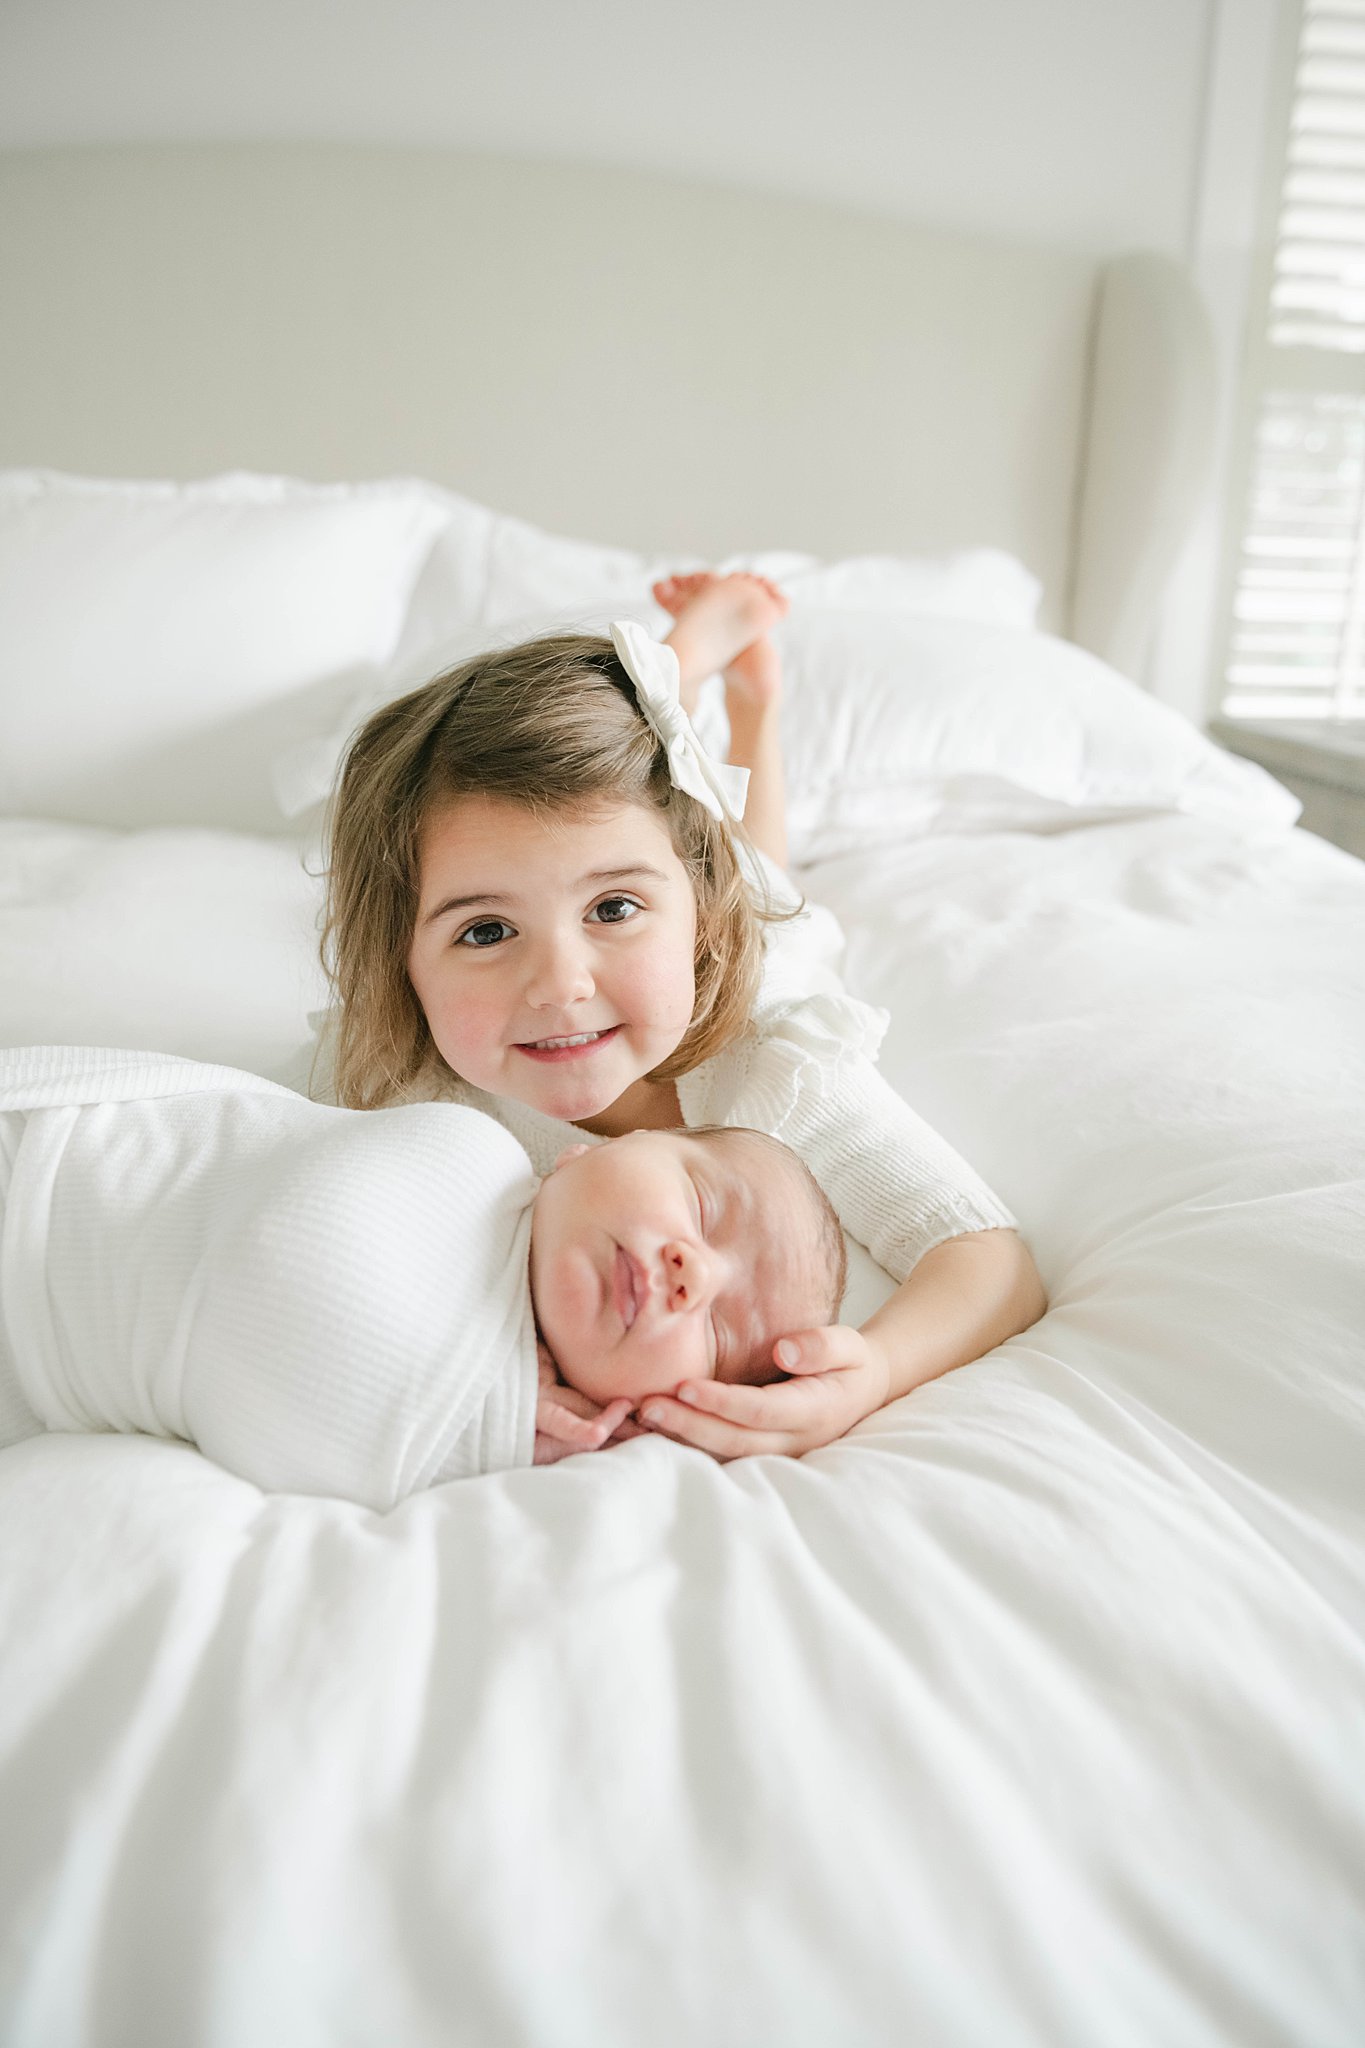 A young girl lays on a bed while holding the head of her sleeping newborn sibling